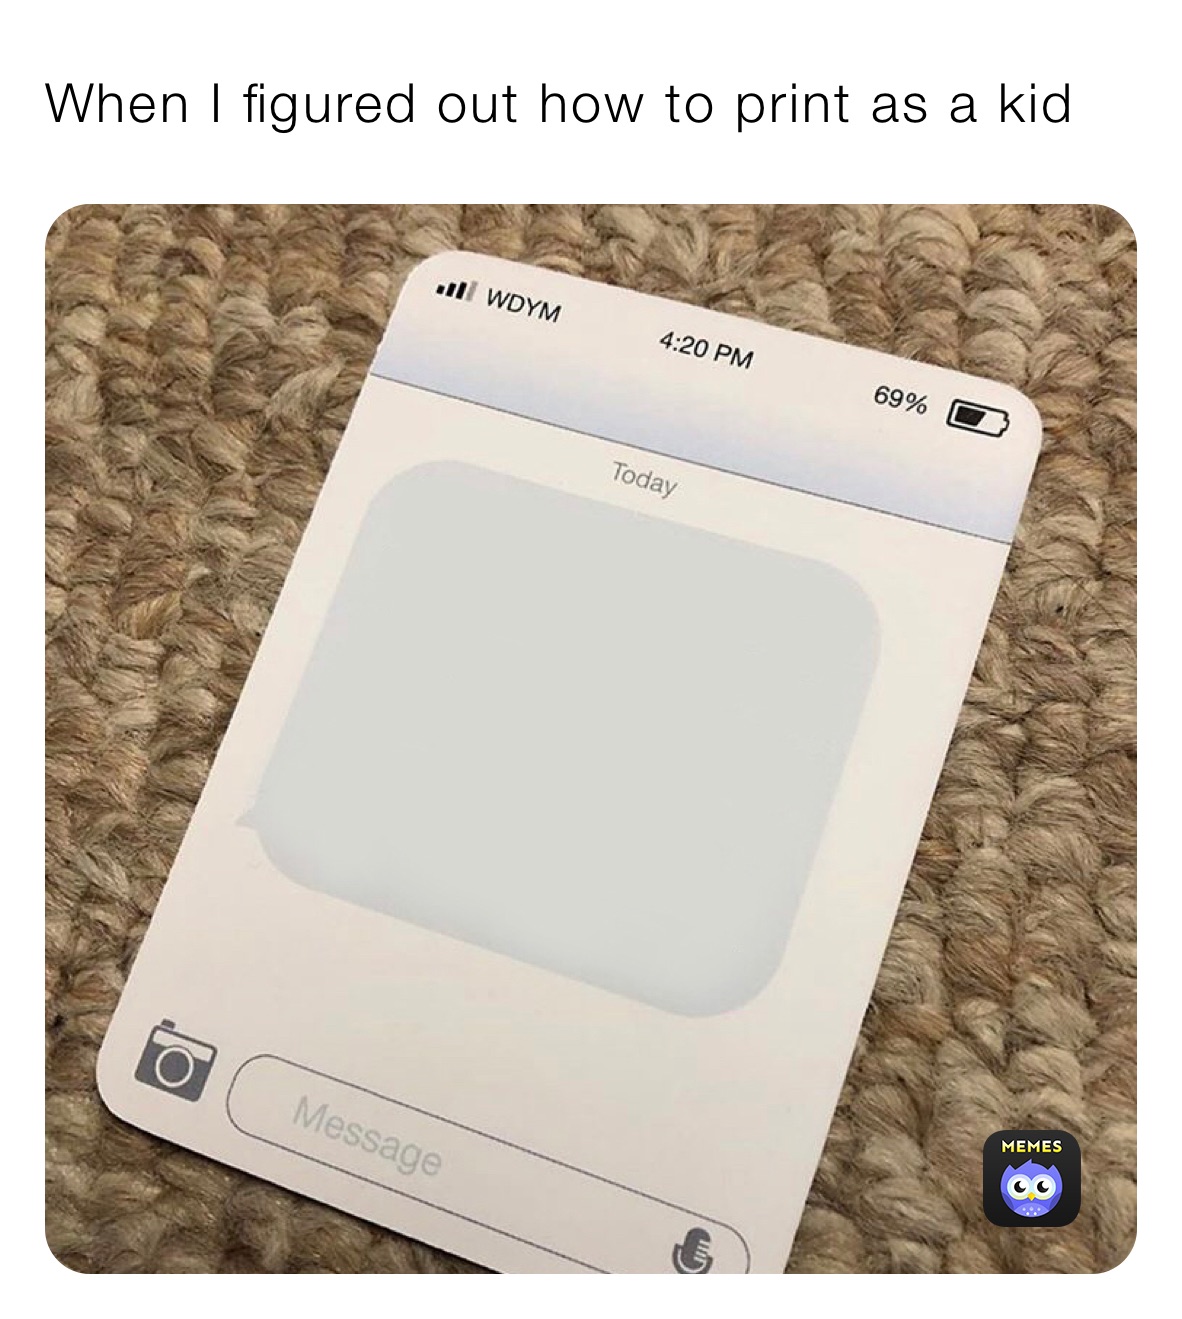 When I figured out how to print as a kid